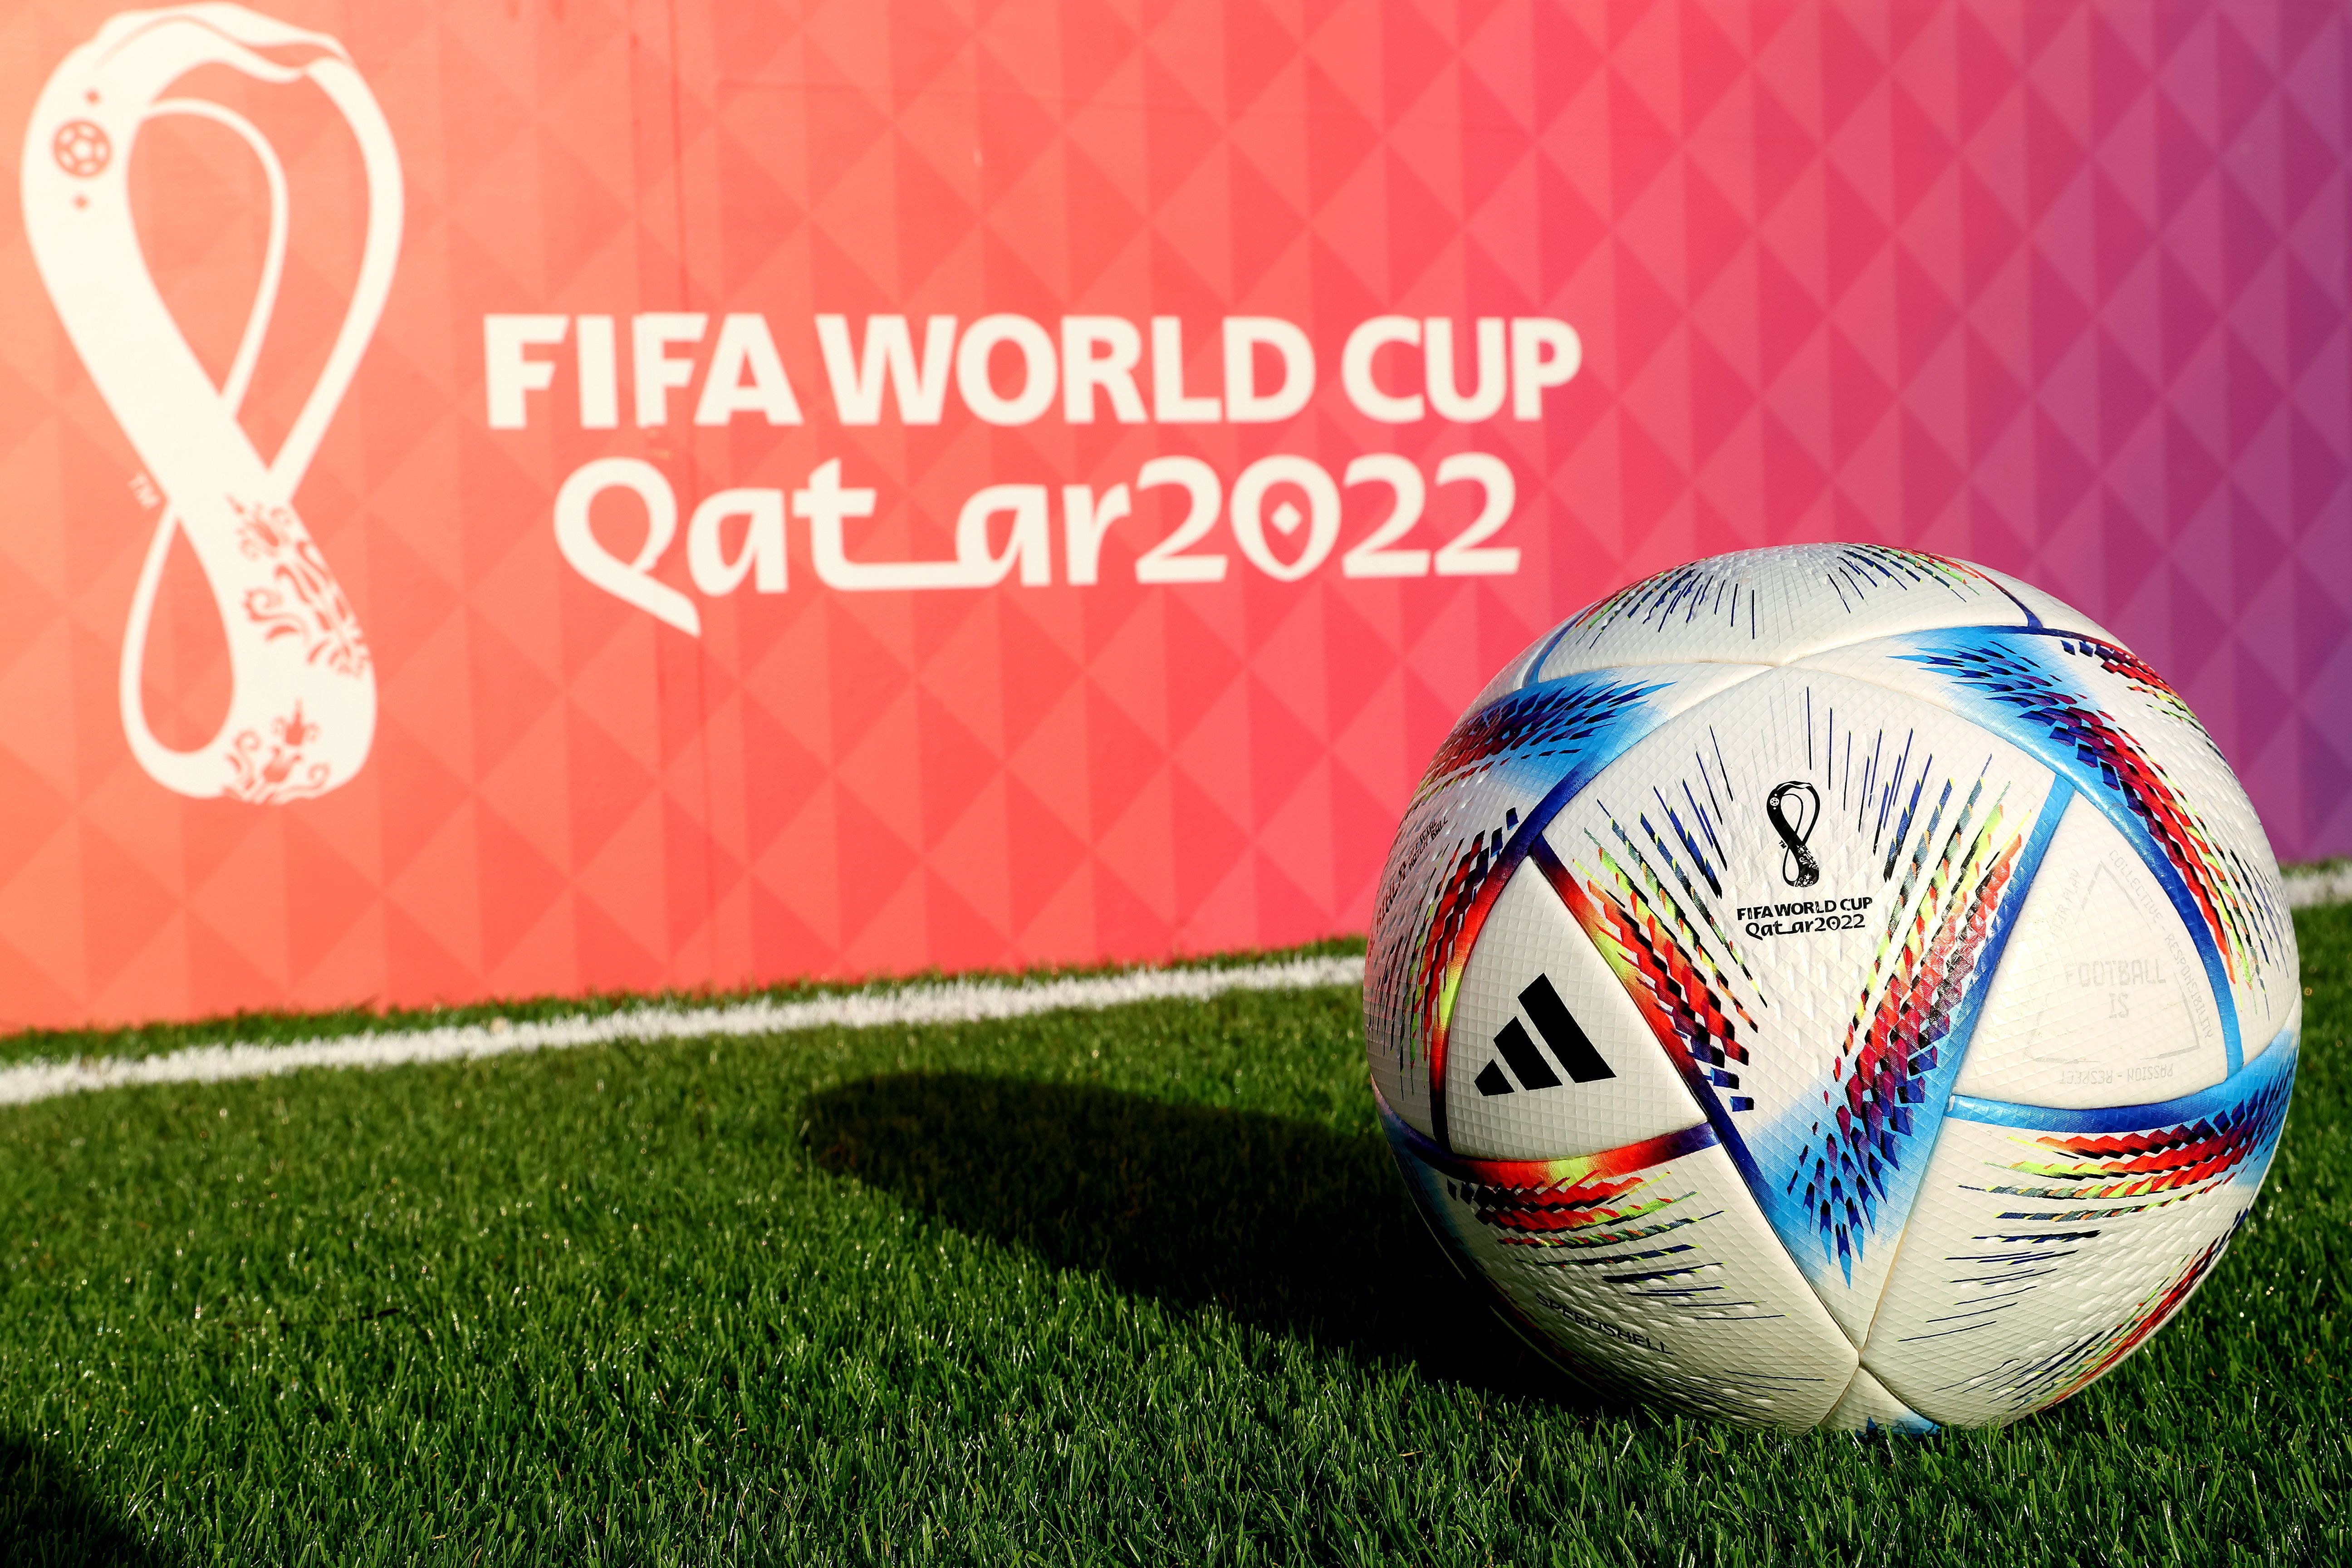 How to Watch the 2022 World Cup